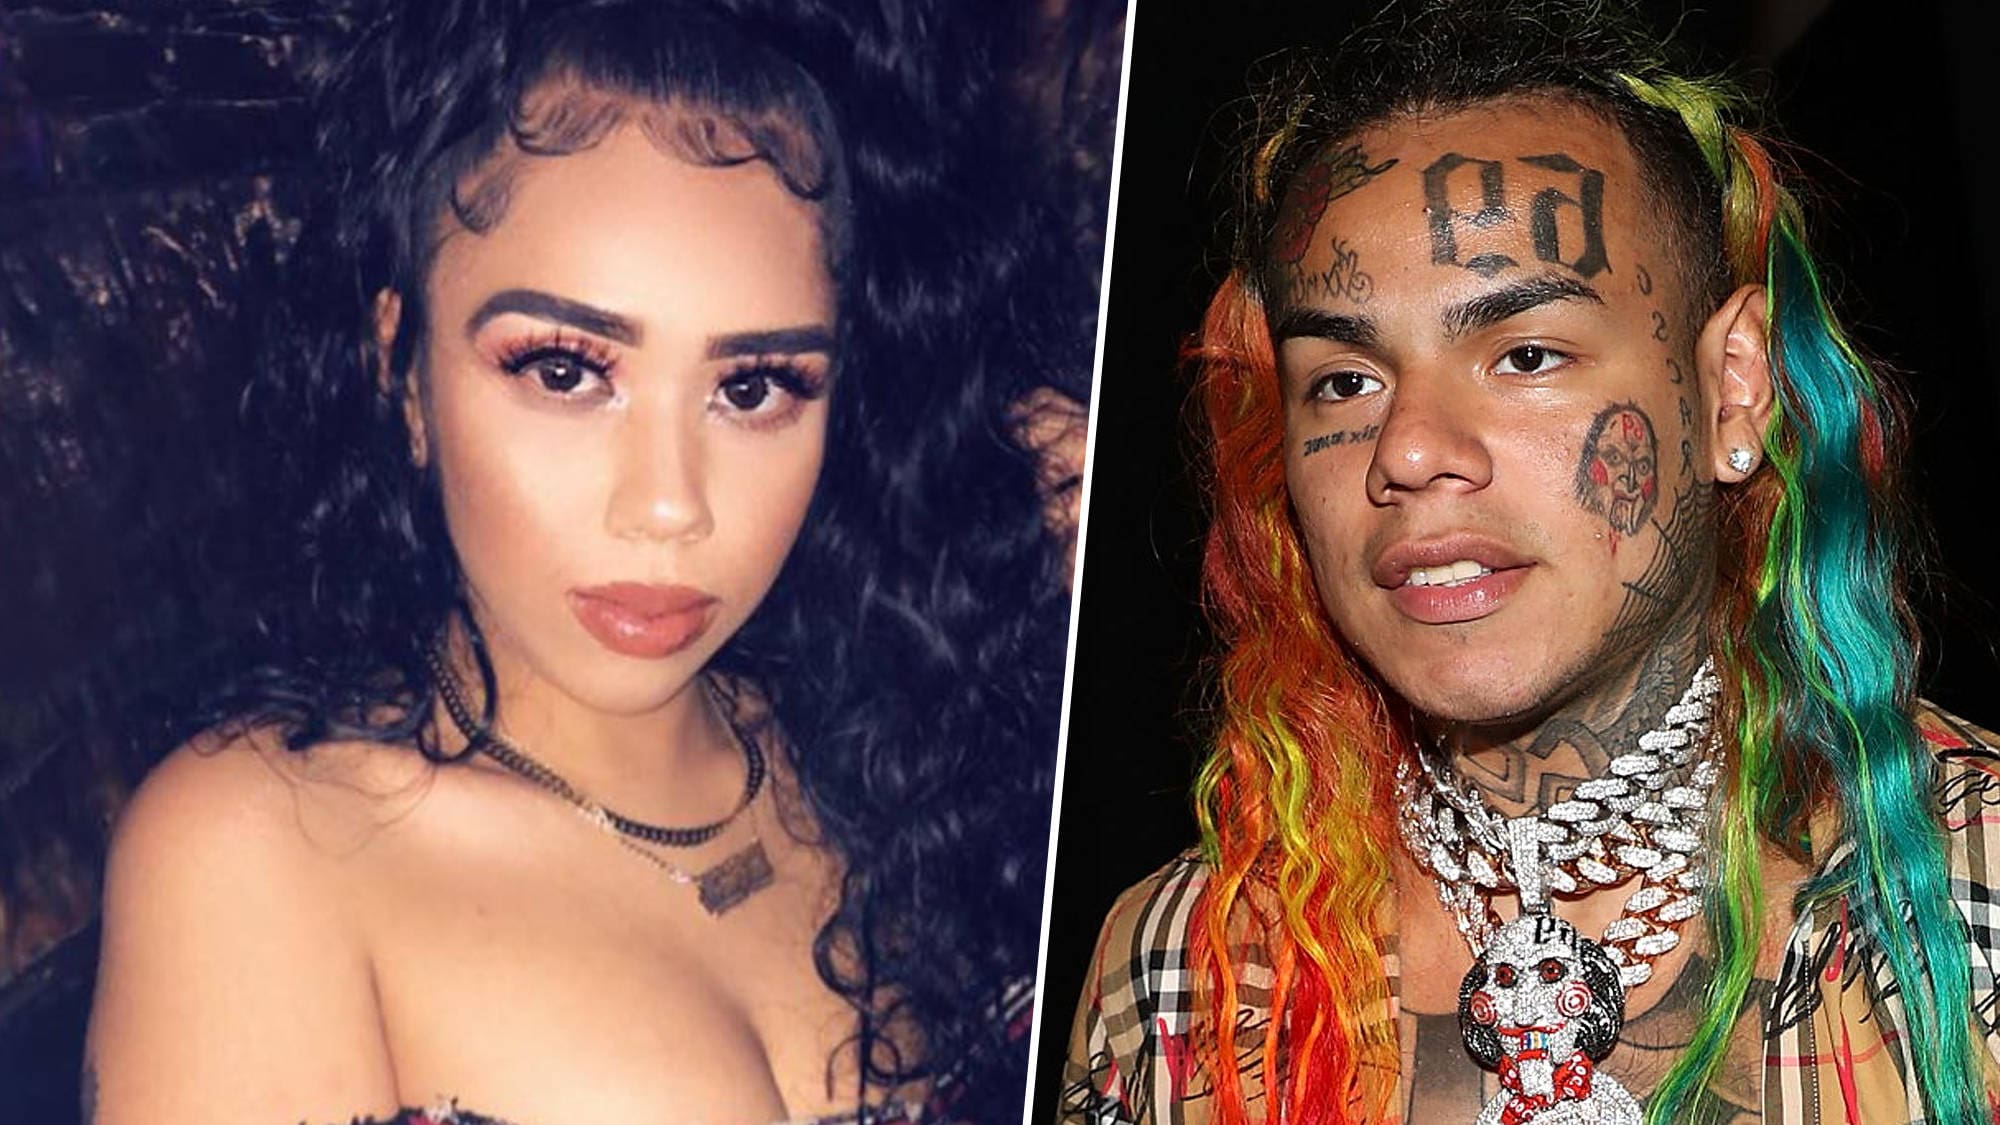 Tekashi 69's Baby Mama, Sara Molina Starts Rapping - She Says Her Flow Is Better Than The One Of Nicki Minaj And Fans Laugh Their Hearts Out - See The Video